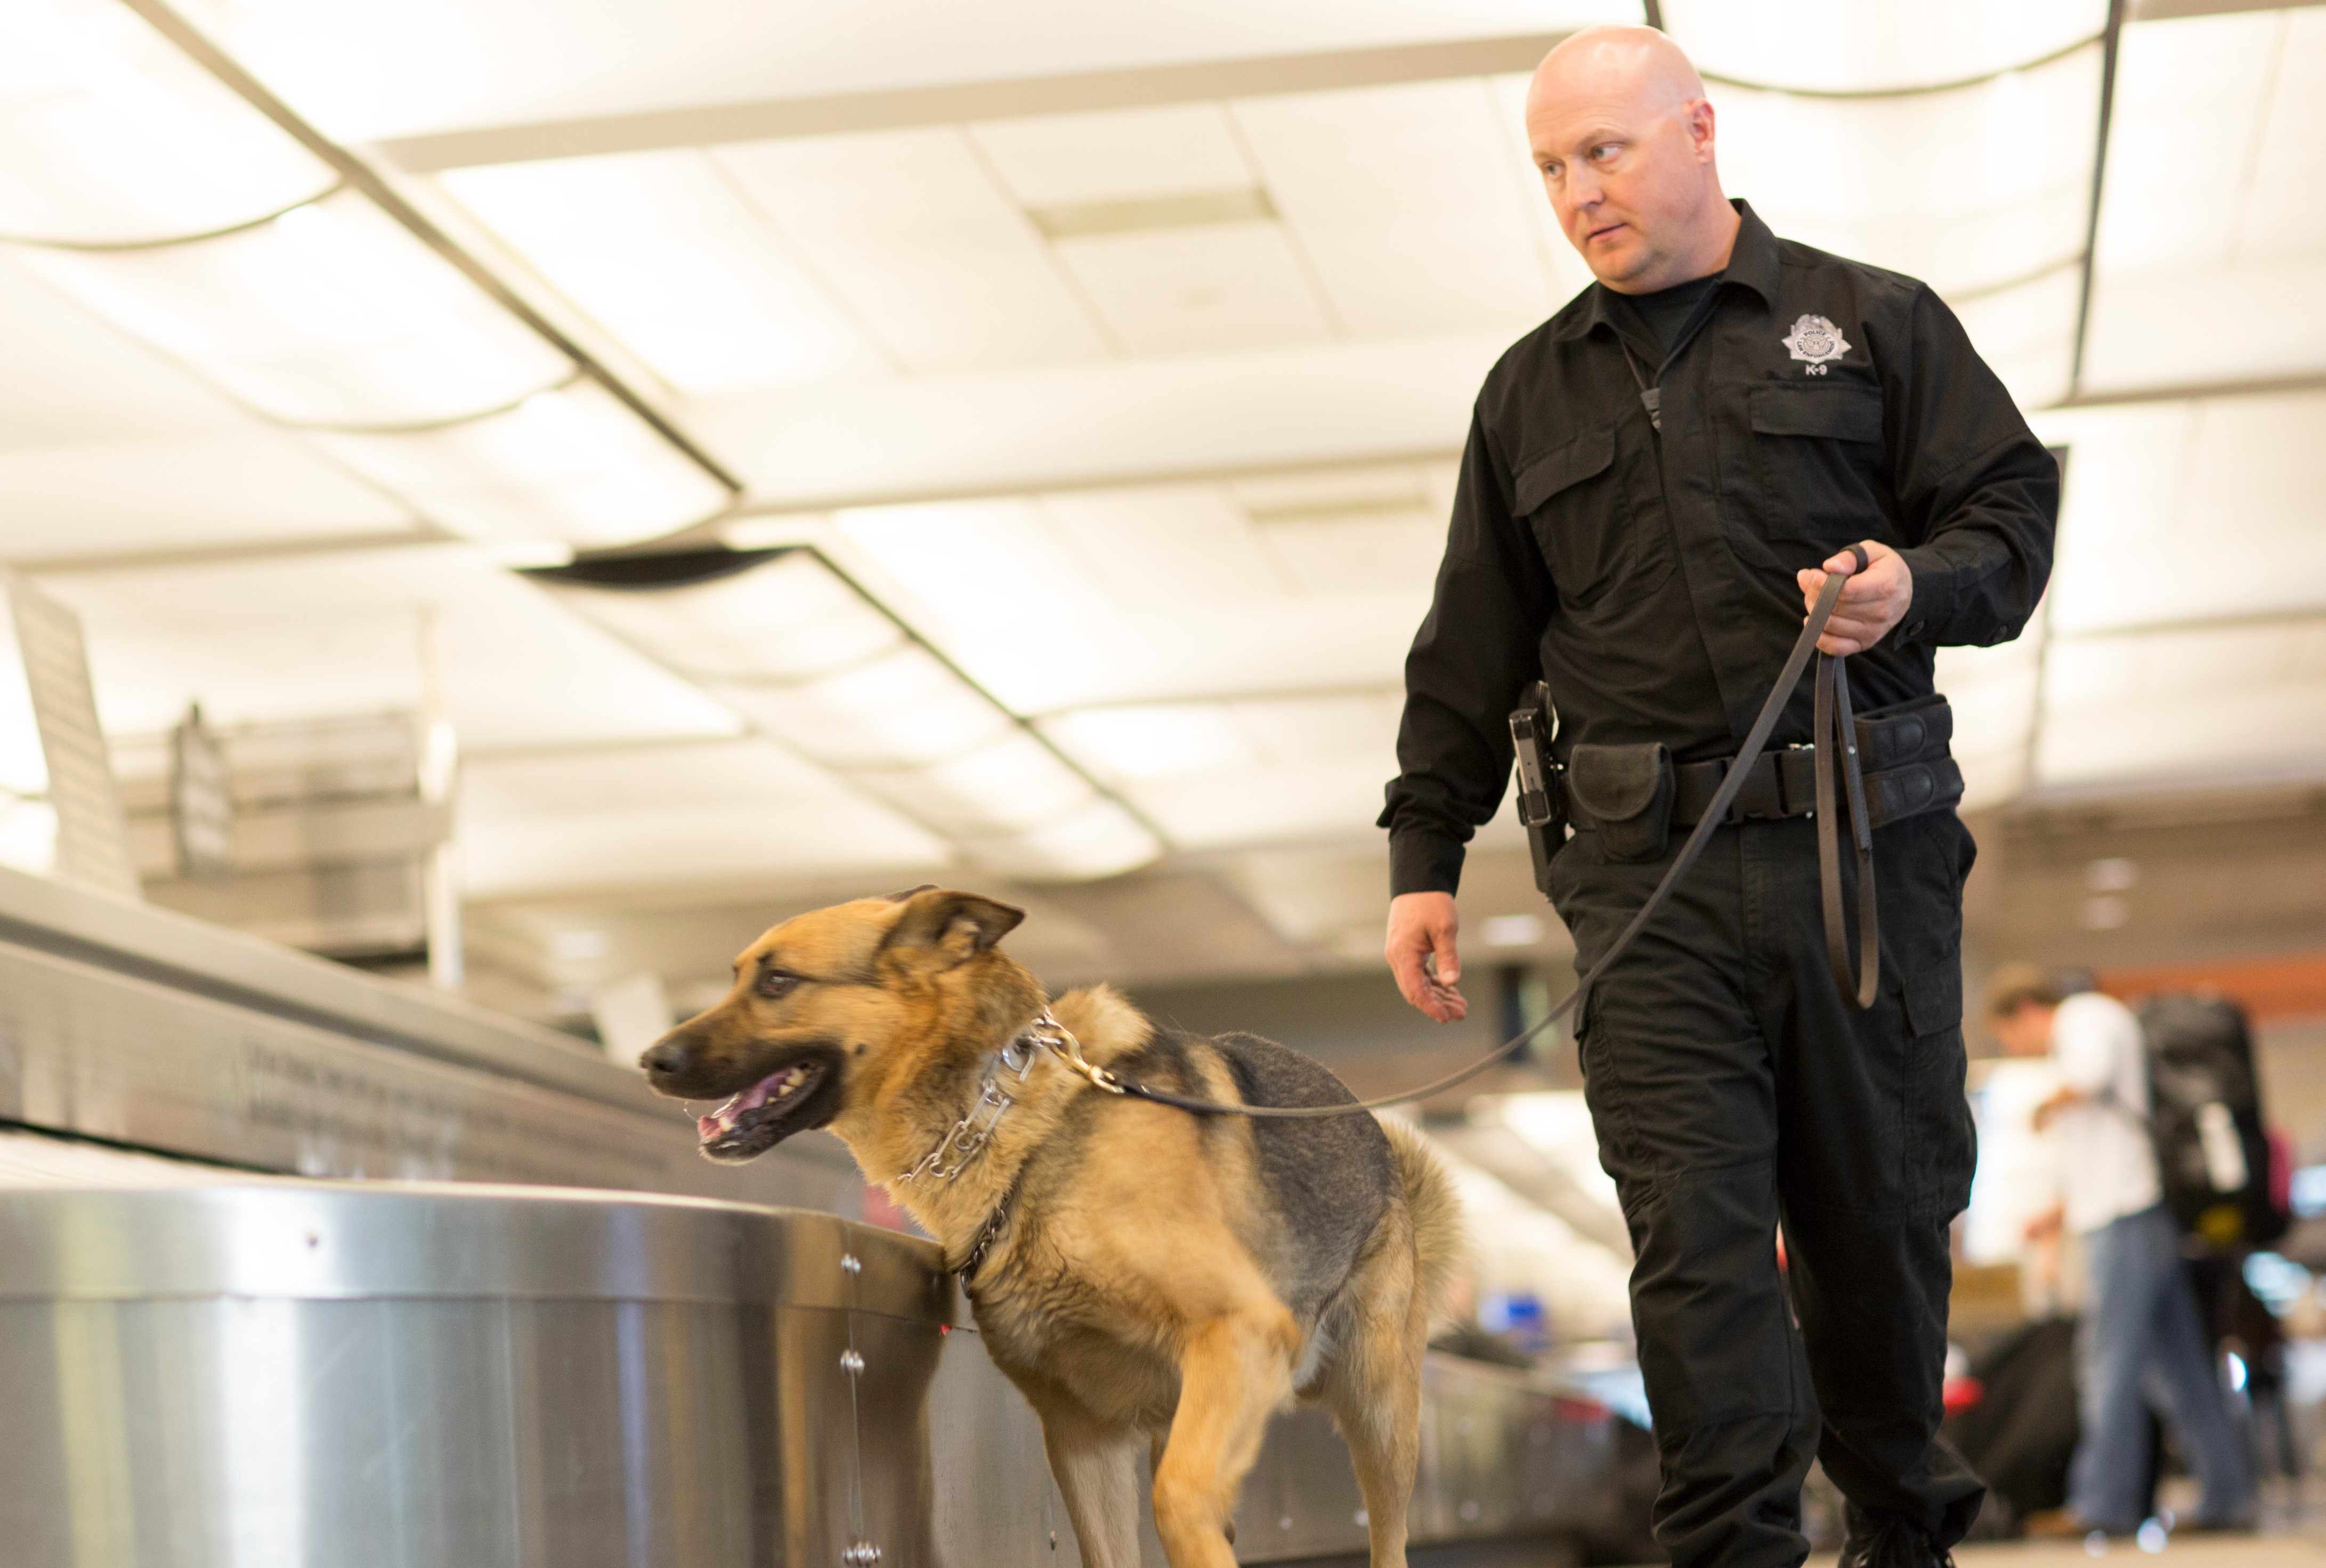 security officer with K-9 police dog